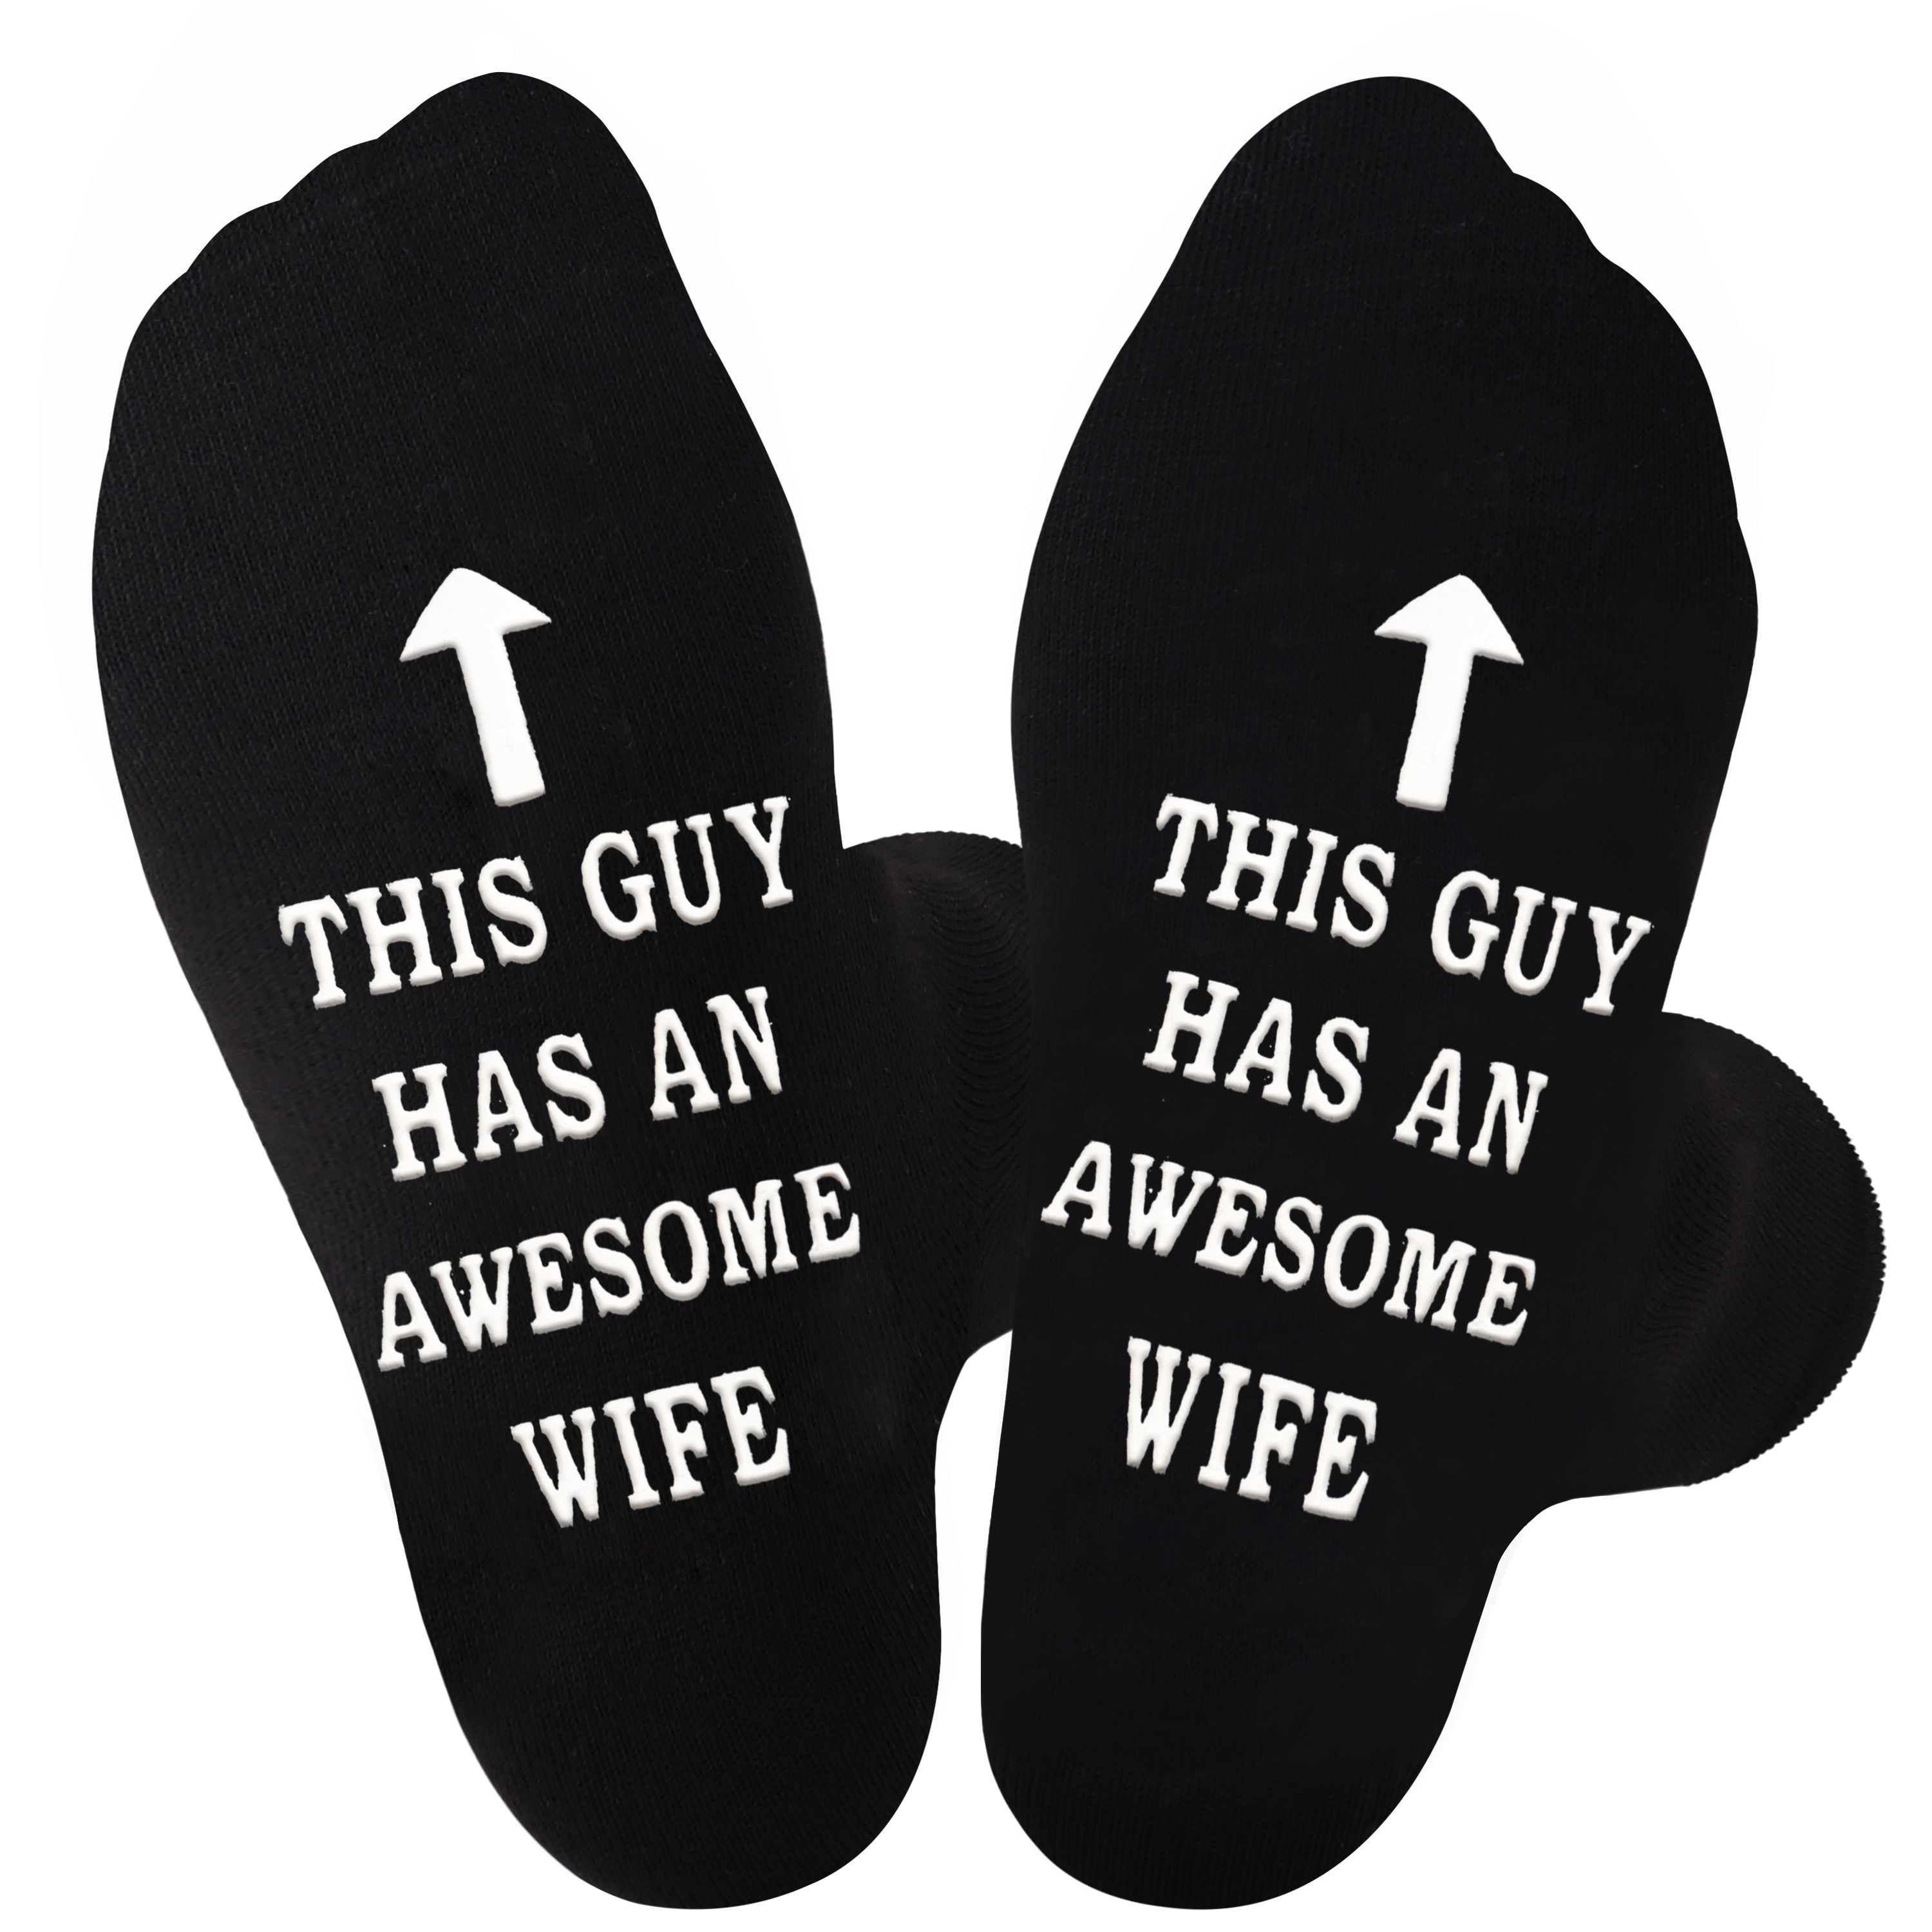 

1pair Men's Funny Cool Saying 'this Guy Has An Awesome Wife' Fashion Novelty Happy Socks, Cotton Comfortable Crew Socks, Socks Gifts For Wedding Day Husband, Valentine Gifts